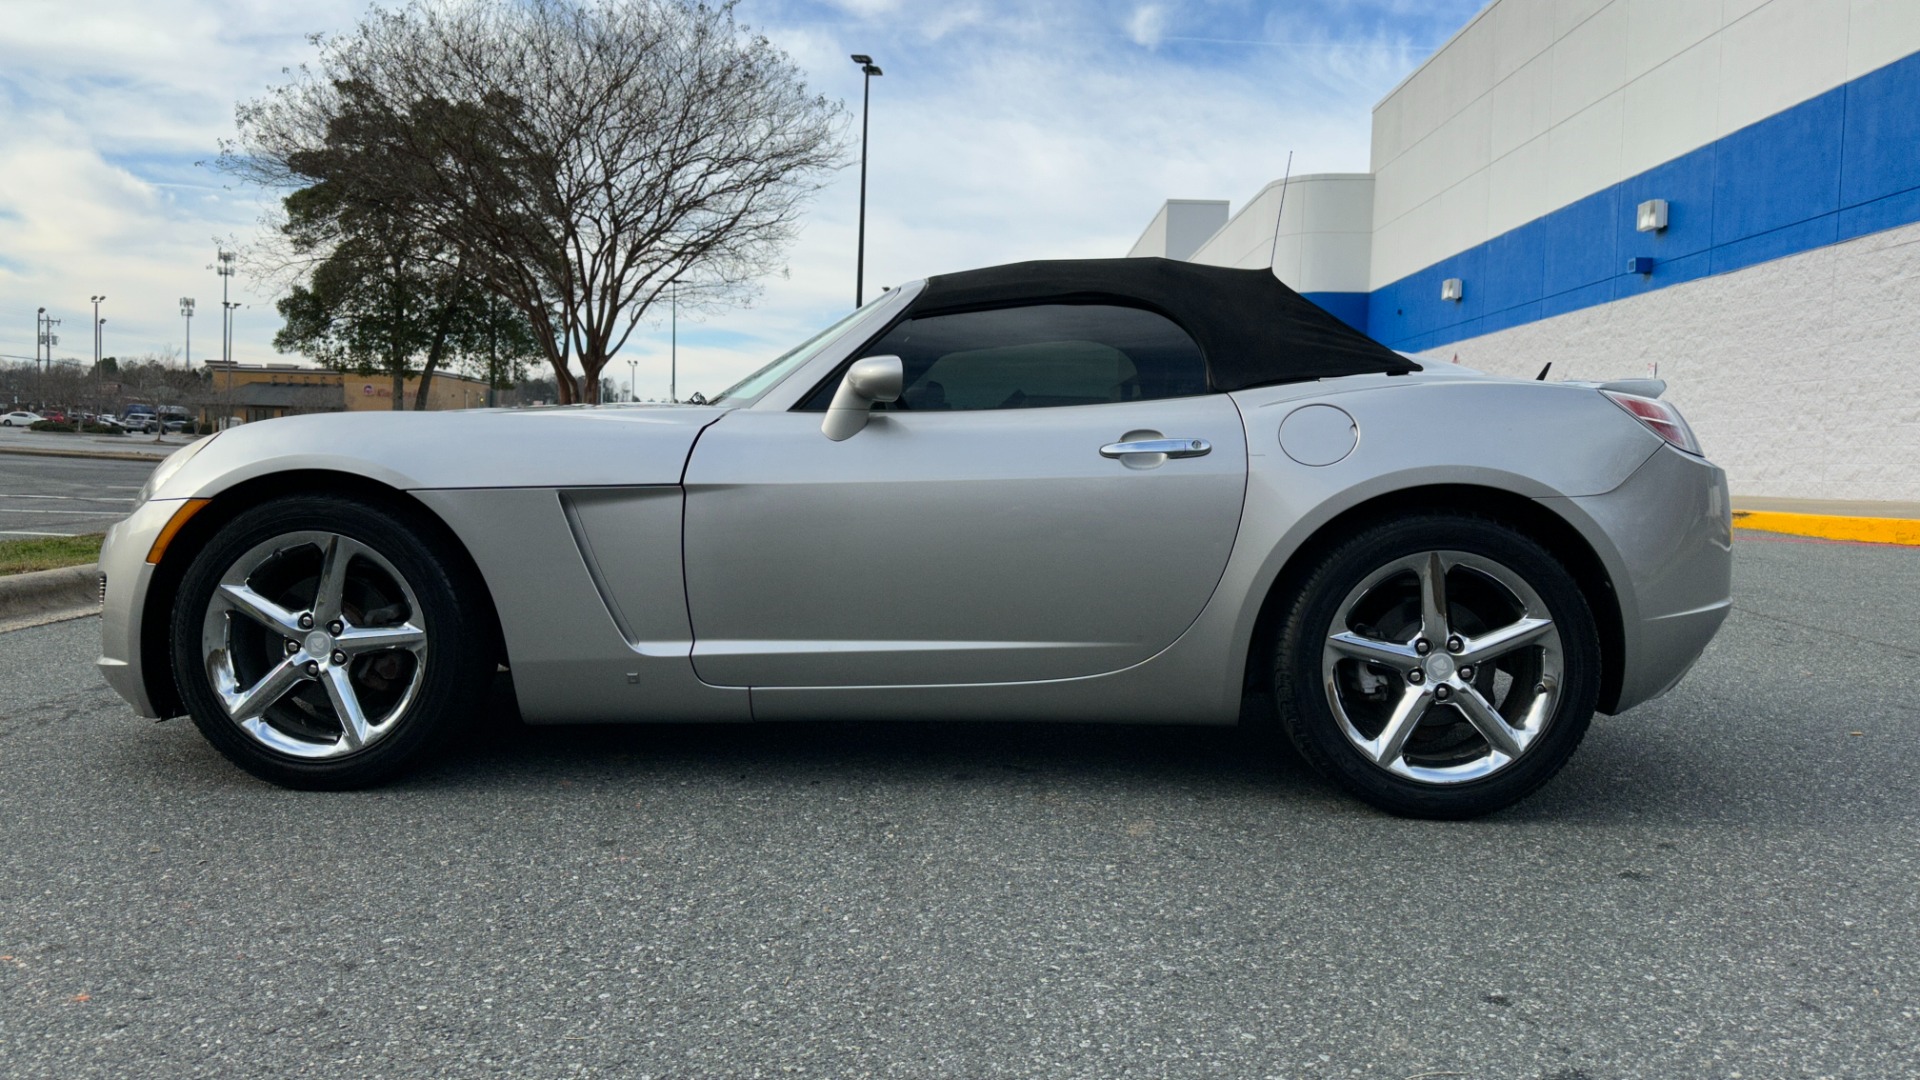 Used 2008 Saturn Sky CONVERTIBLE / MONSOON AUDIO / AUTOMATIC / PREMIUM TRIM / SPOILER for sale $10,995 at Formula Imports in Charlotte NC 28227 7